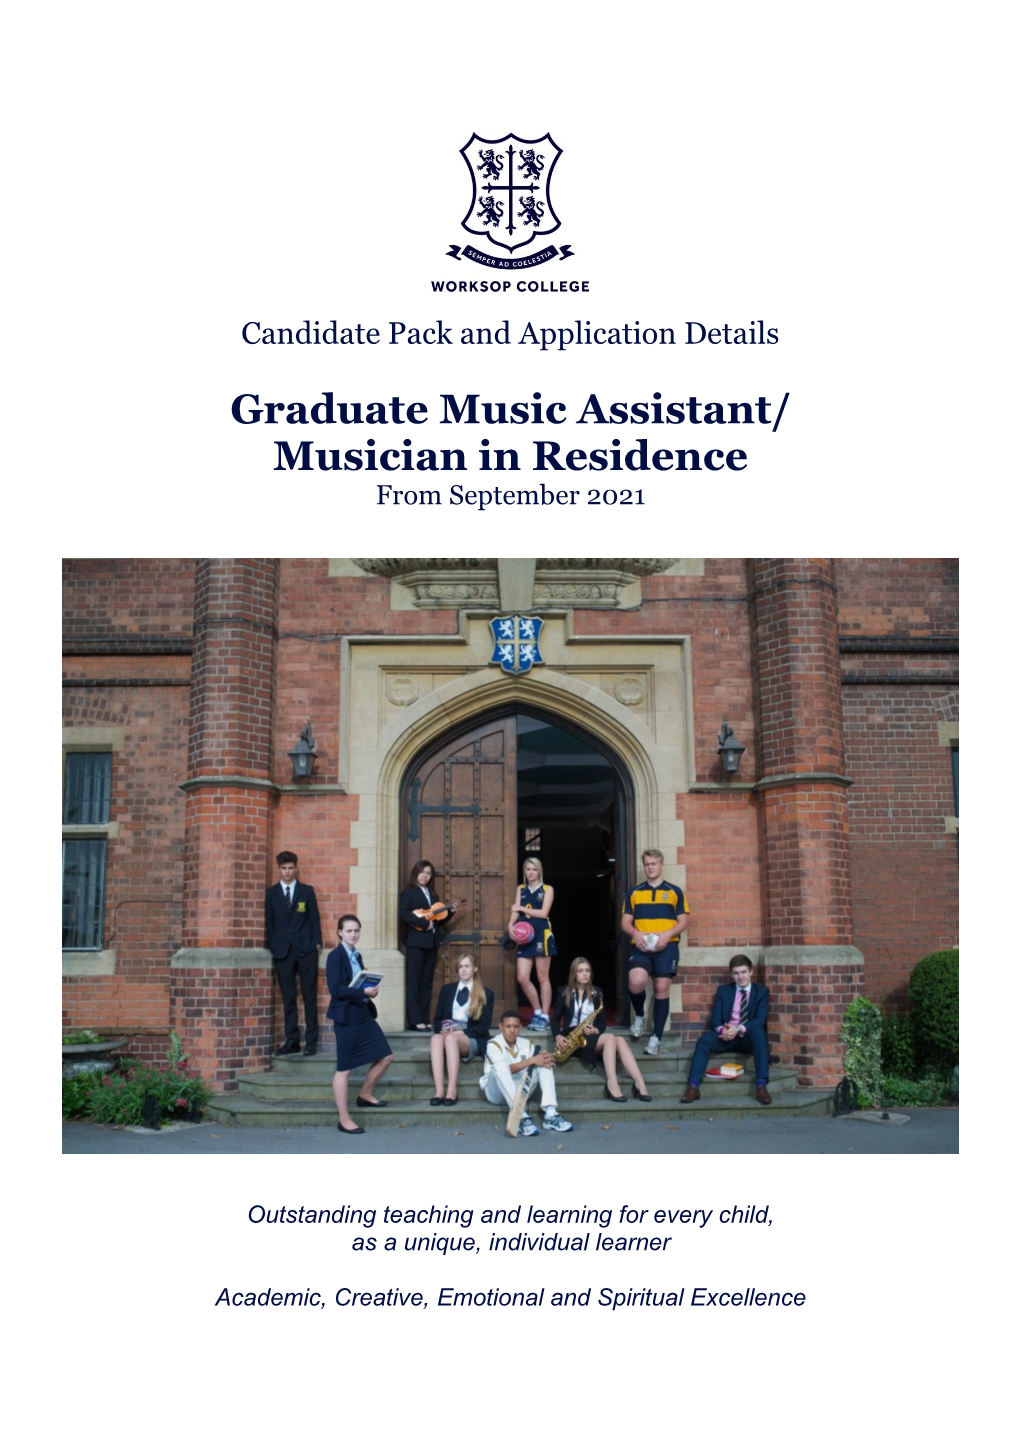 Graduate Music Assistant/ Musician in Residence from September 2021